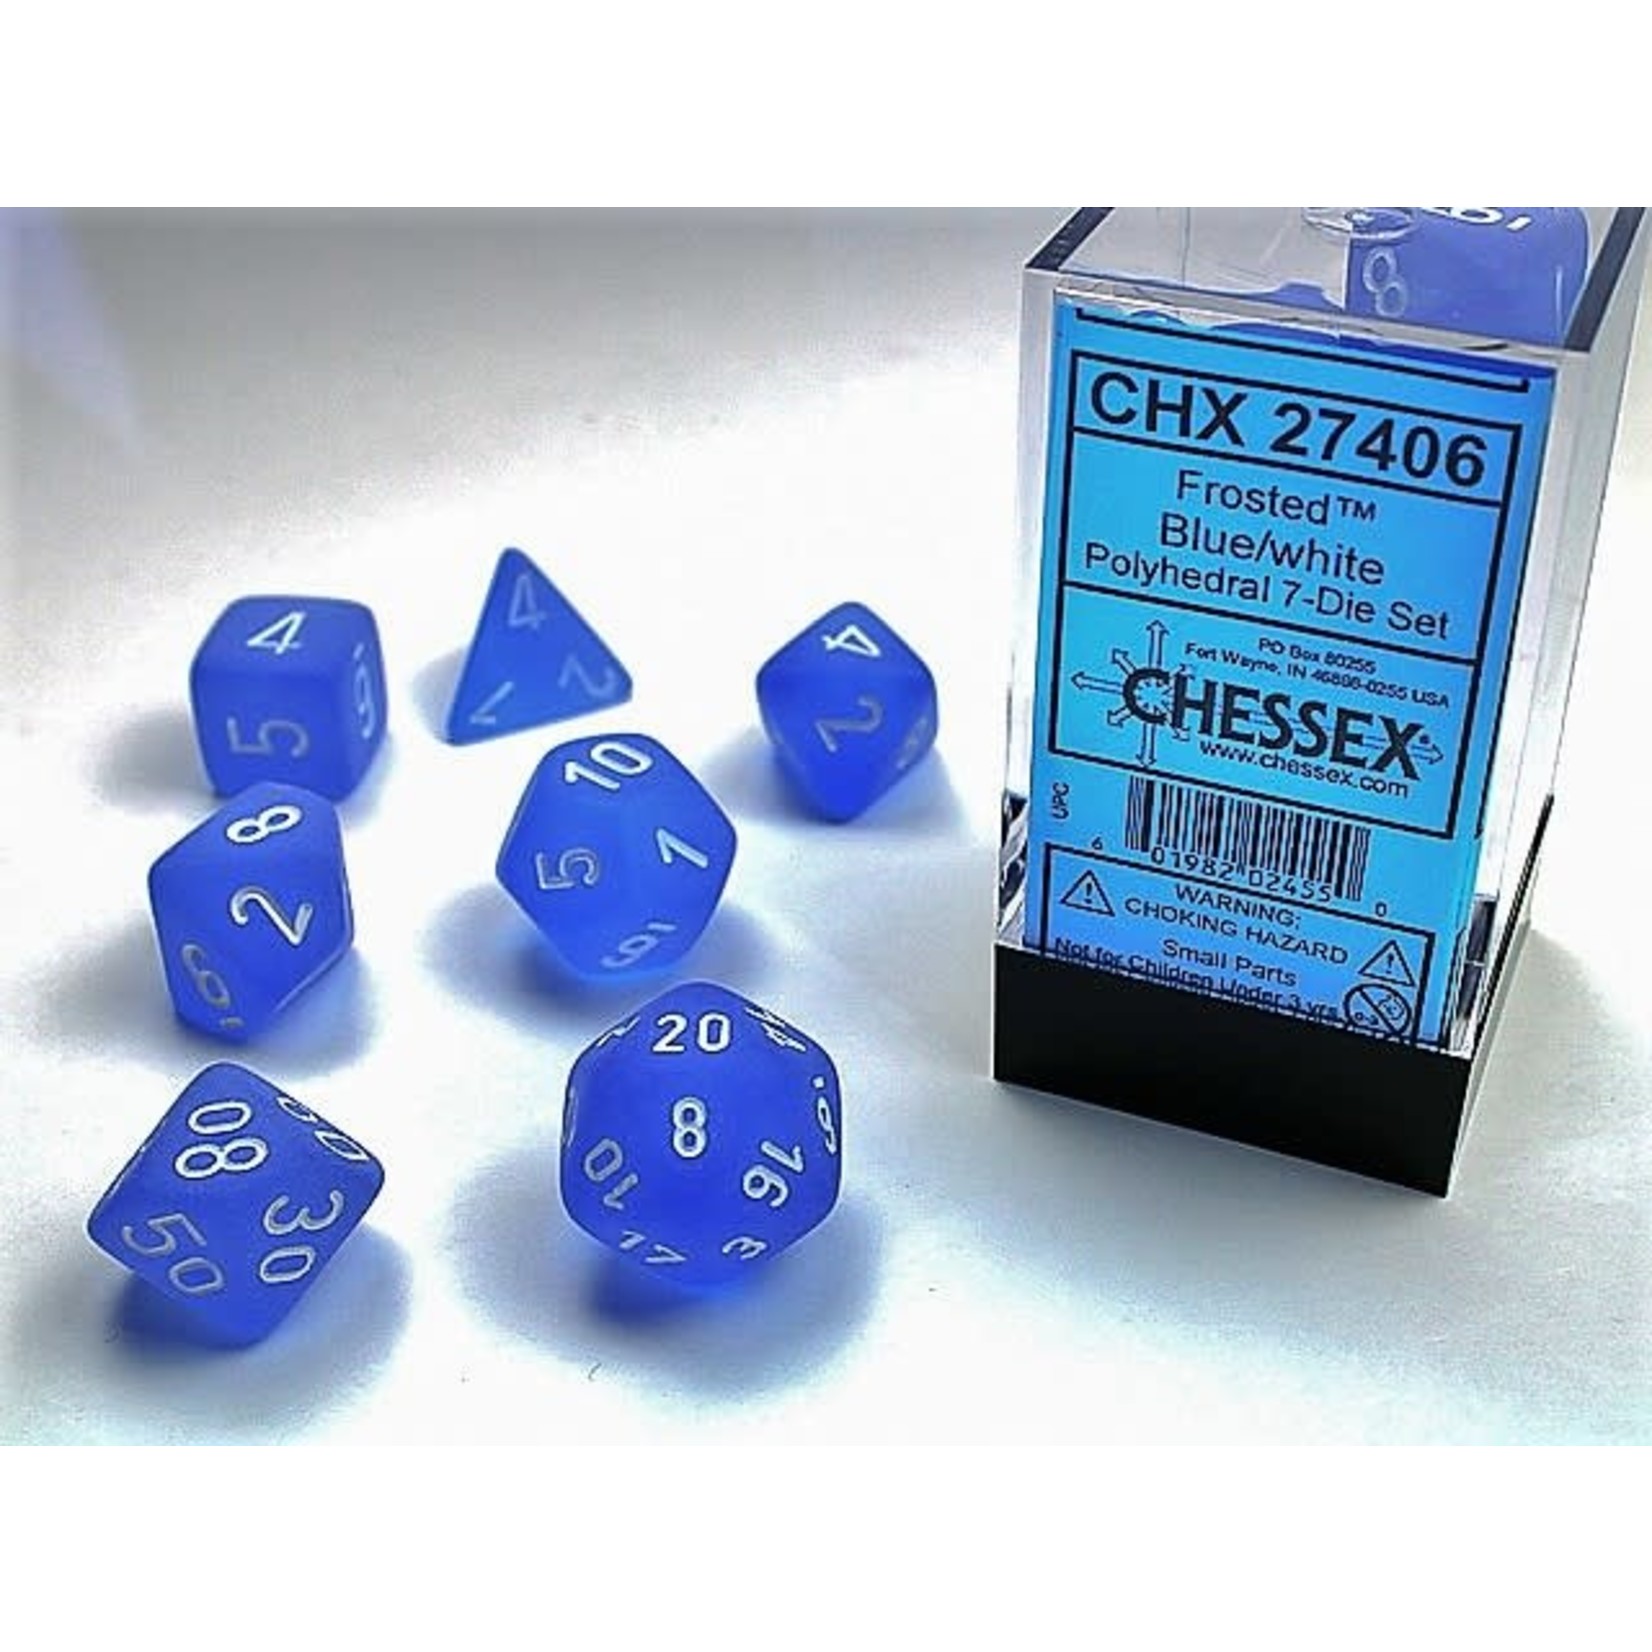 Chessex Dice RPG 27406 7pc Frosted Blue/White